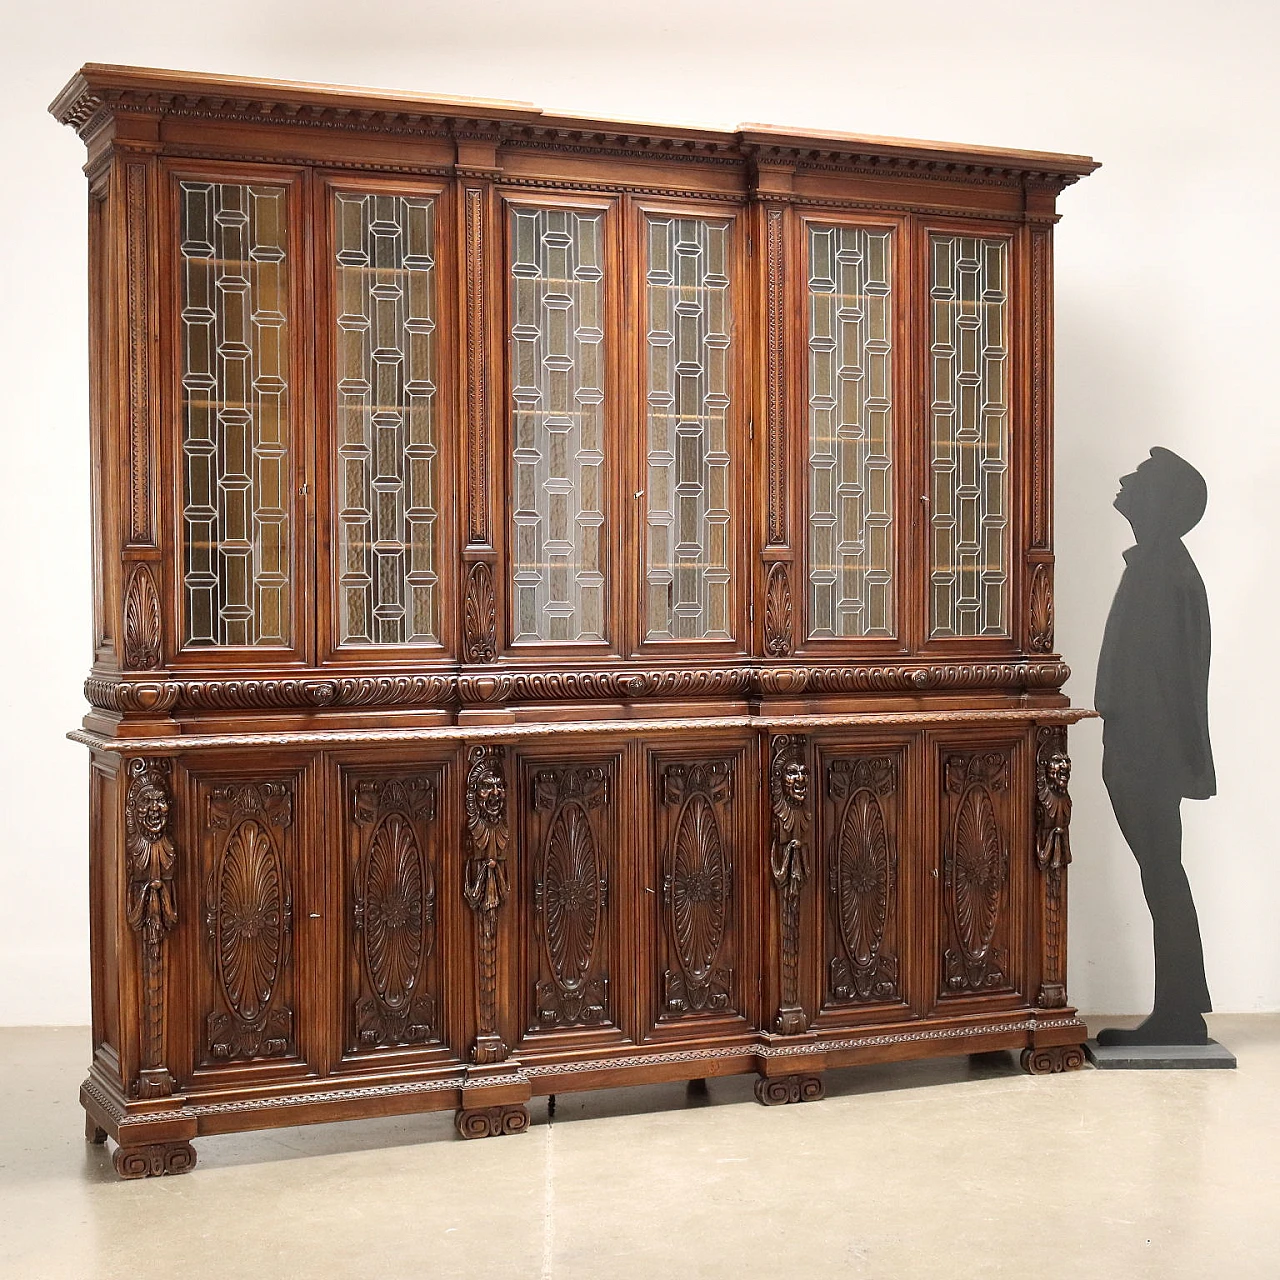 Carved walnut bookcase with leaded glass doors, 19th century 2